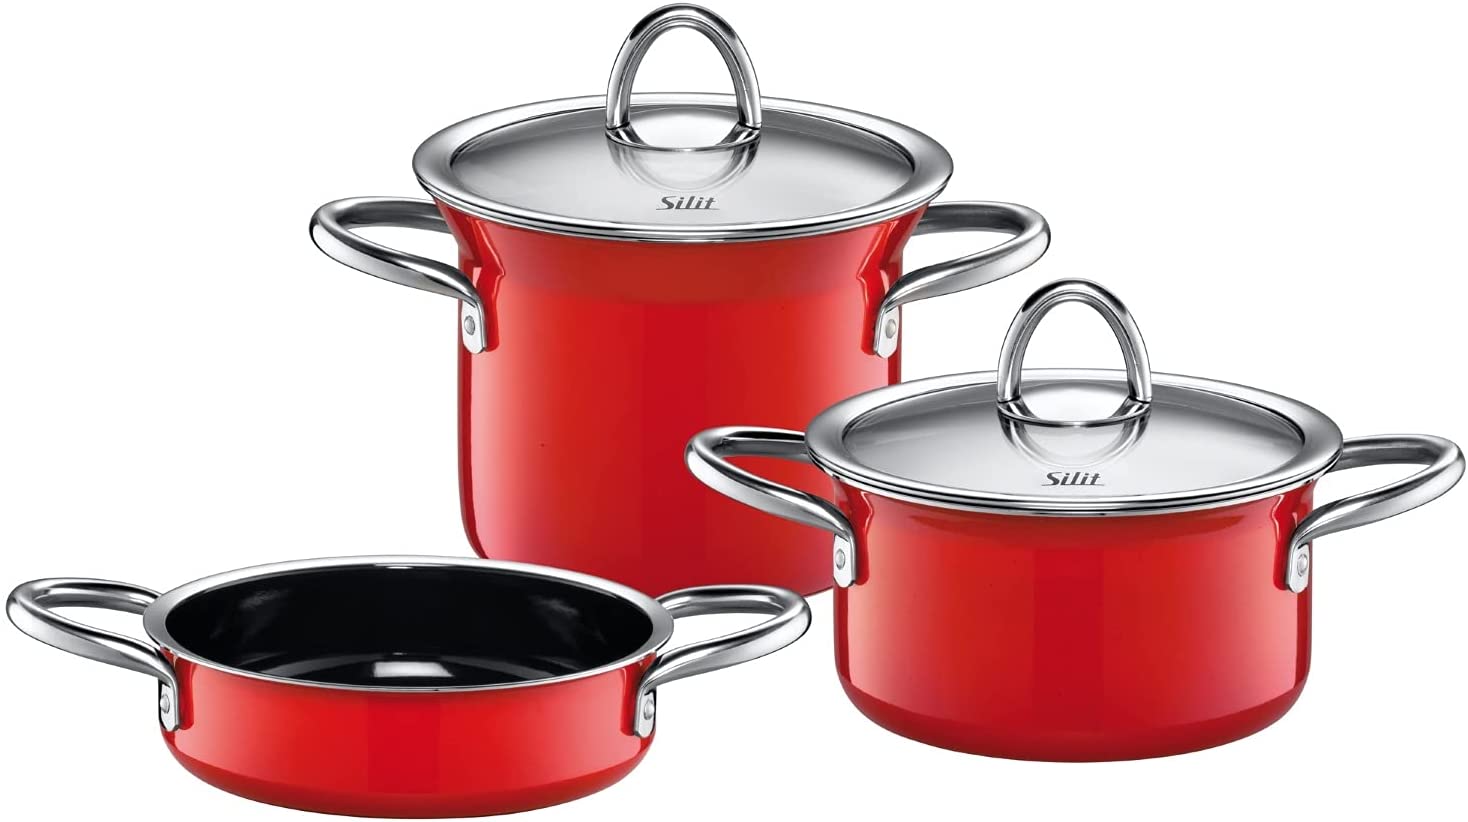 Silit Mini Max 13174812 4-Piece Cookware Set, Energy Red